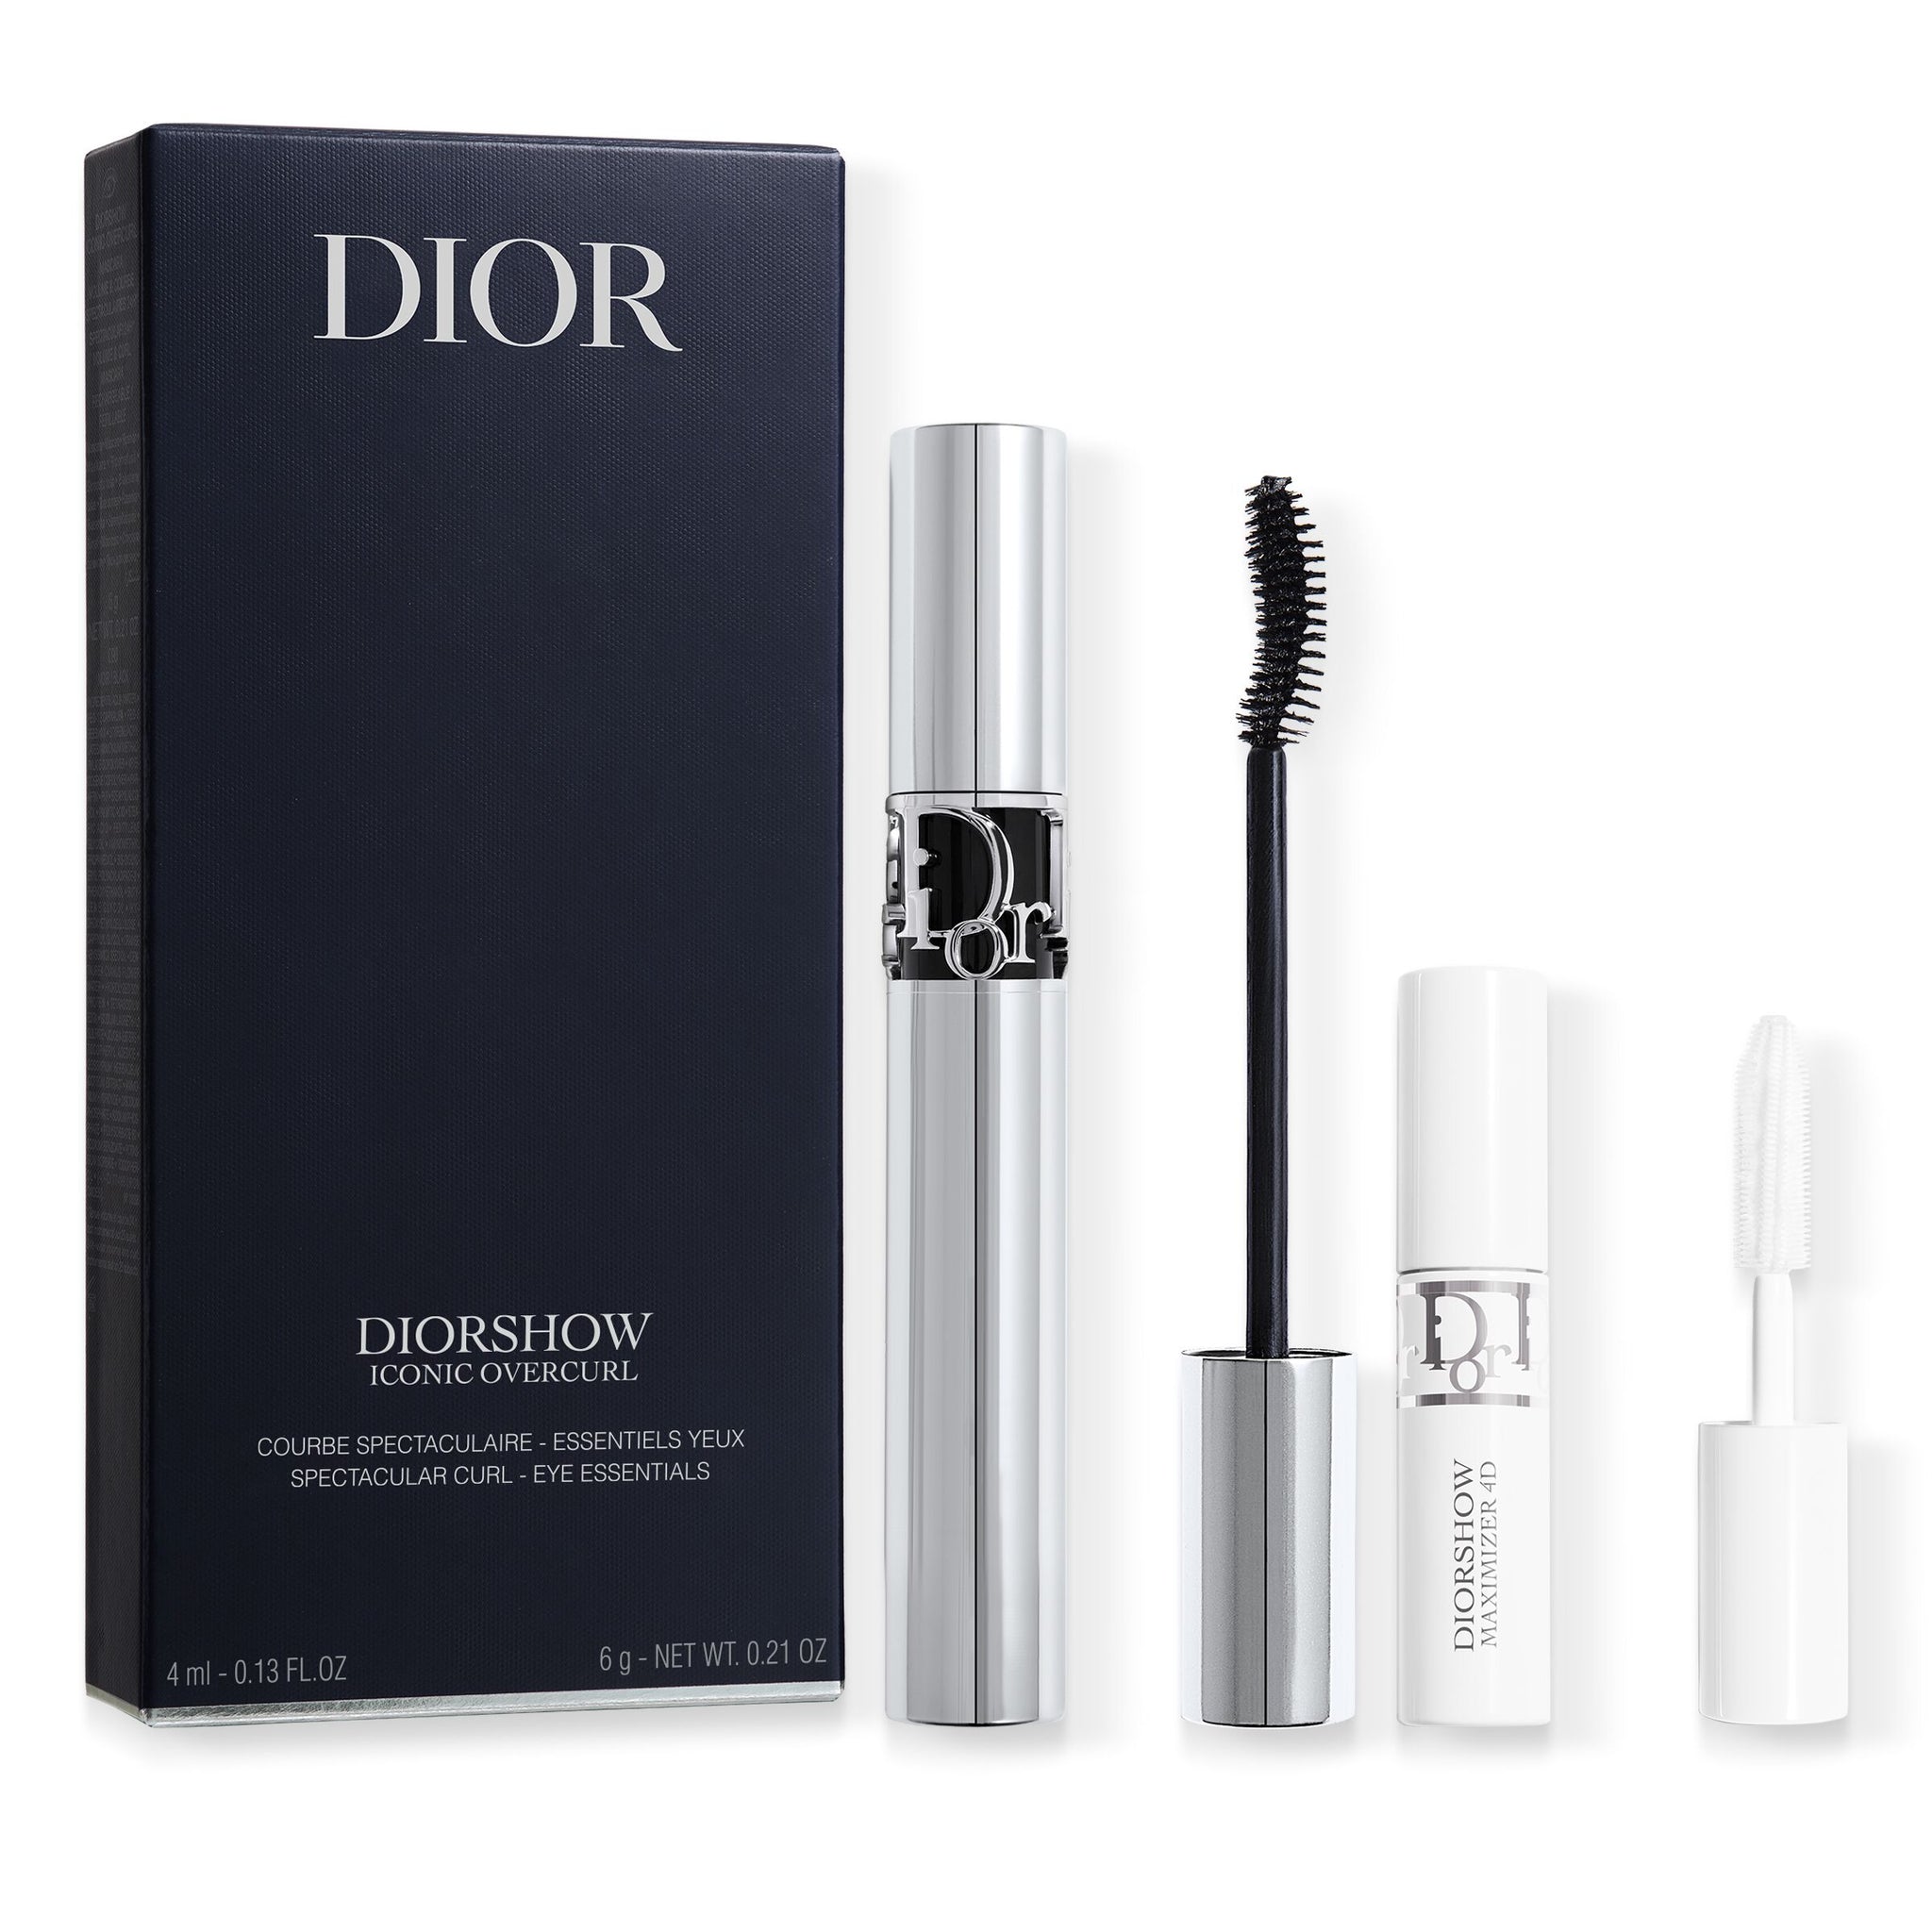 DIORSHOW ICONIC OVERCURL SET | Limited Edition - Spectacular Curl - Eye Essentials - Mascara and Lash Primer-Serum - Limited Edition